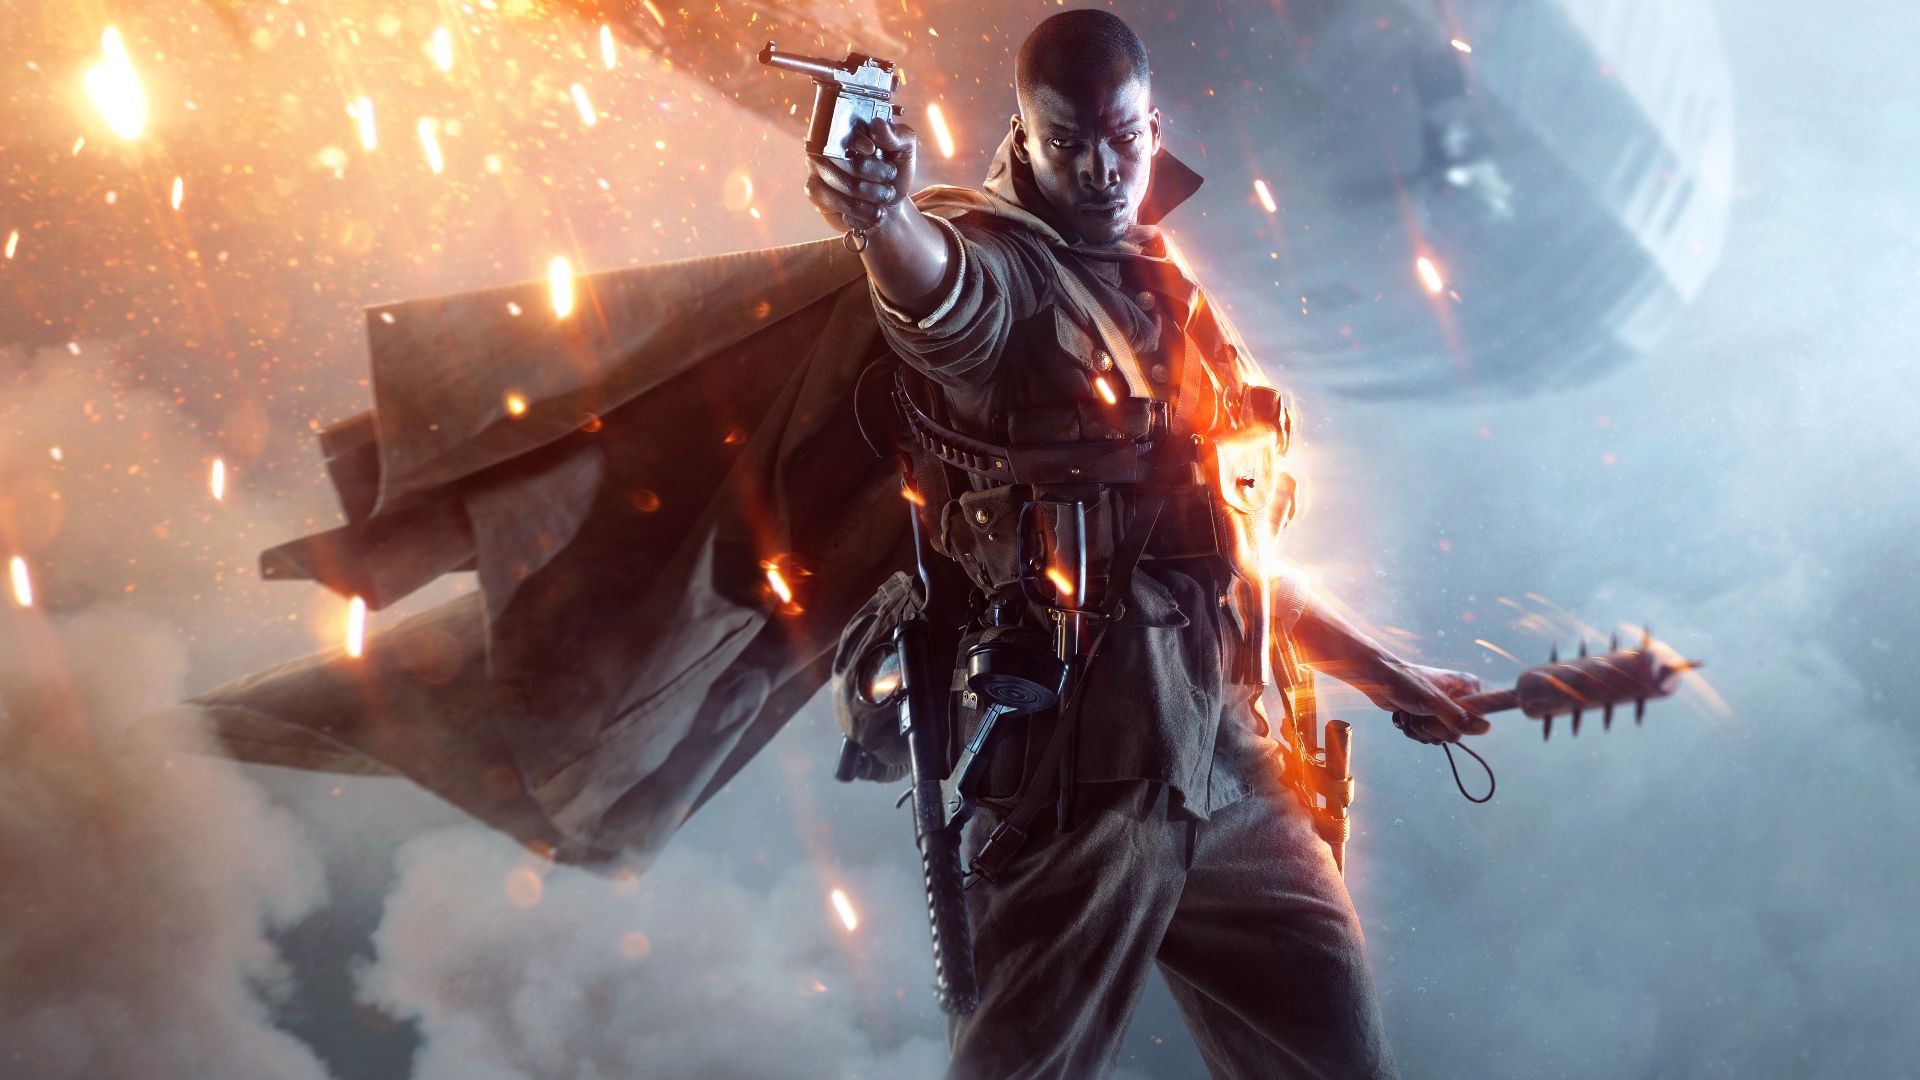 EA is training AI agents to play Battlefield 1